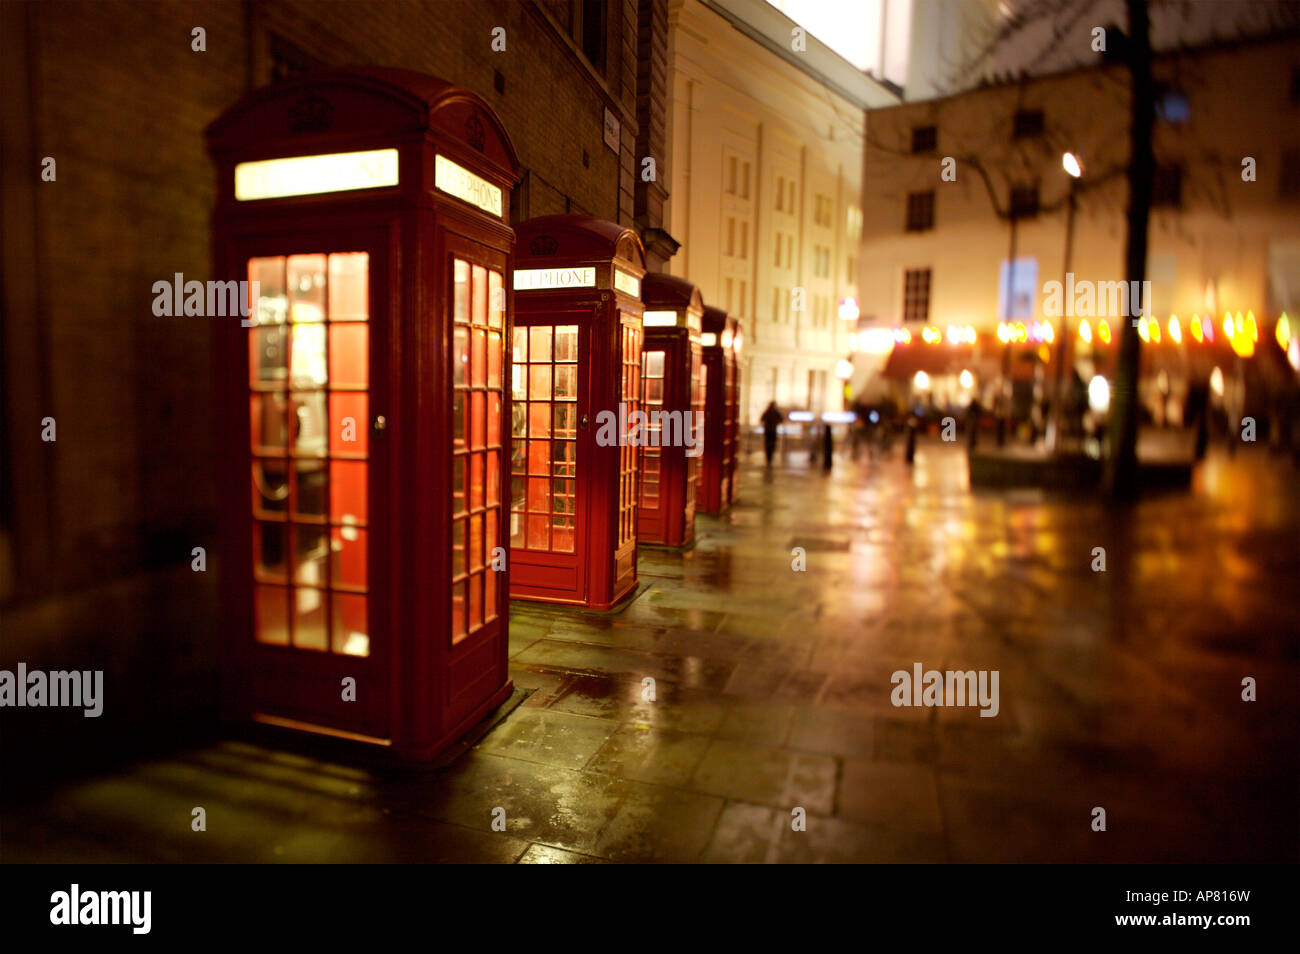 A row of British Telephone Boxes in Covent Garden, London Stock Photo